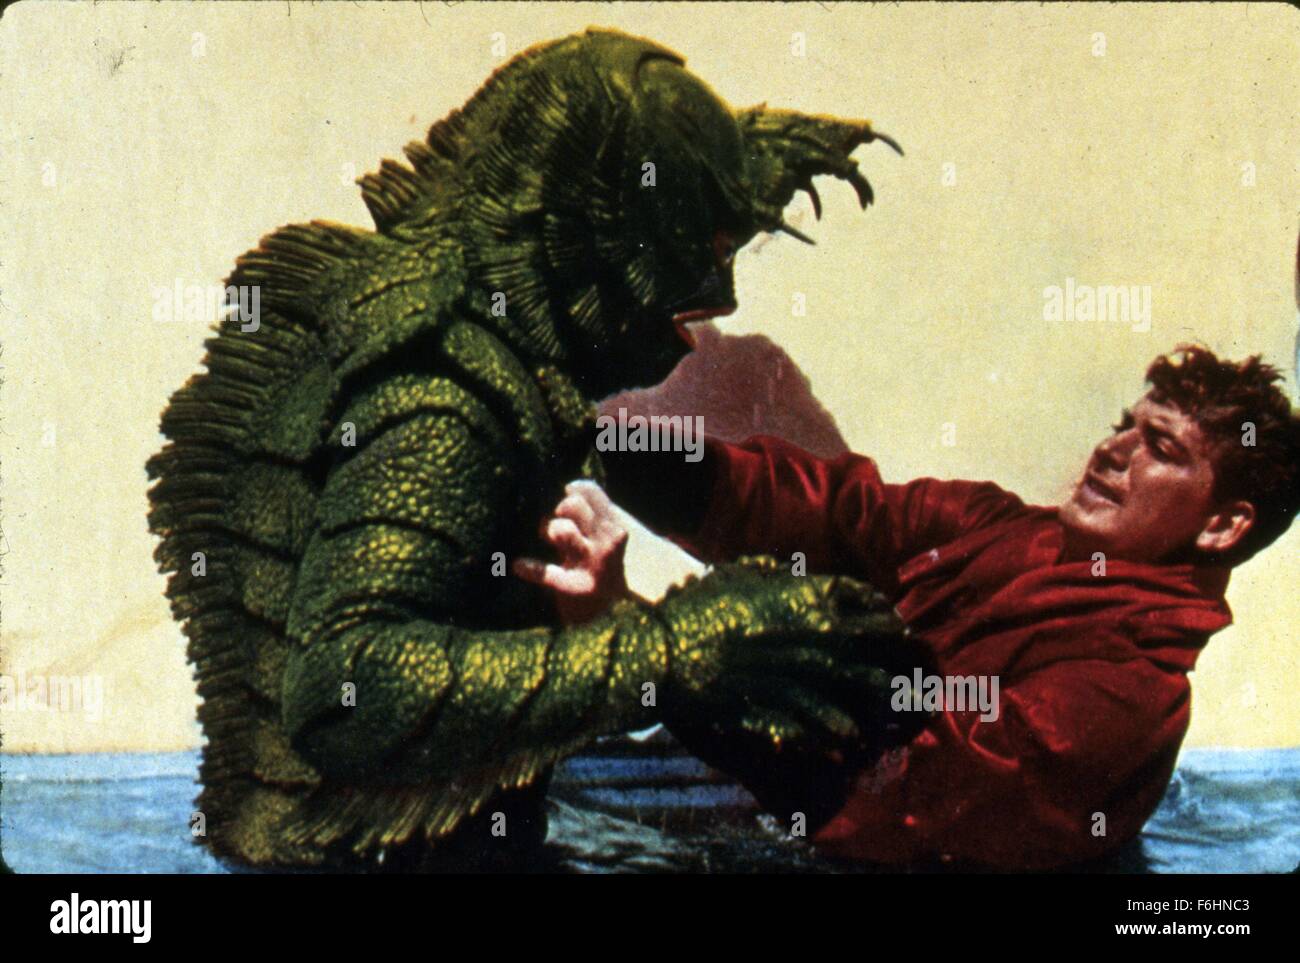 1955, Film Title: REVENGE OF THE CREATURE, Director: JACK ARNOLD, Studio: UNIV, Pictured: JOHN BROMFIELD, ITS & ALIENS! THINGS, SCARED, GRIP, GRASP, SHAKING, SCALES, MONSTER, SEA MONSTER, SCI-FI, HORROR, ATTACKING, FEAR. (Credit Image: SNAP) Stock Photo